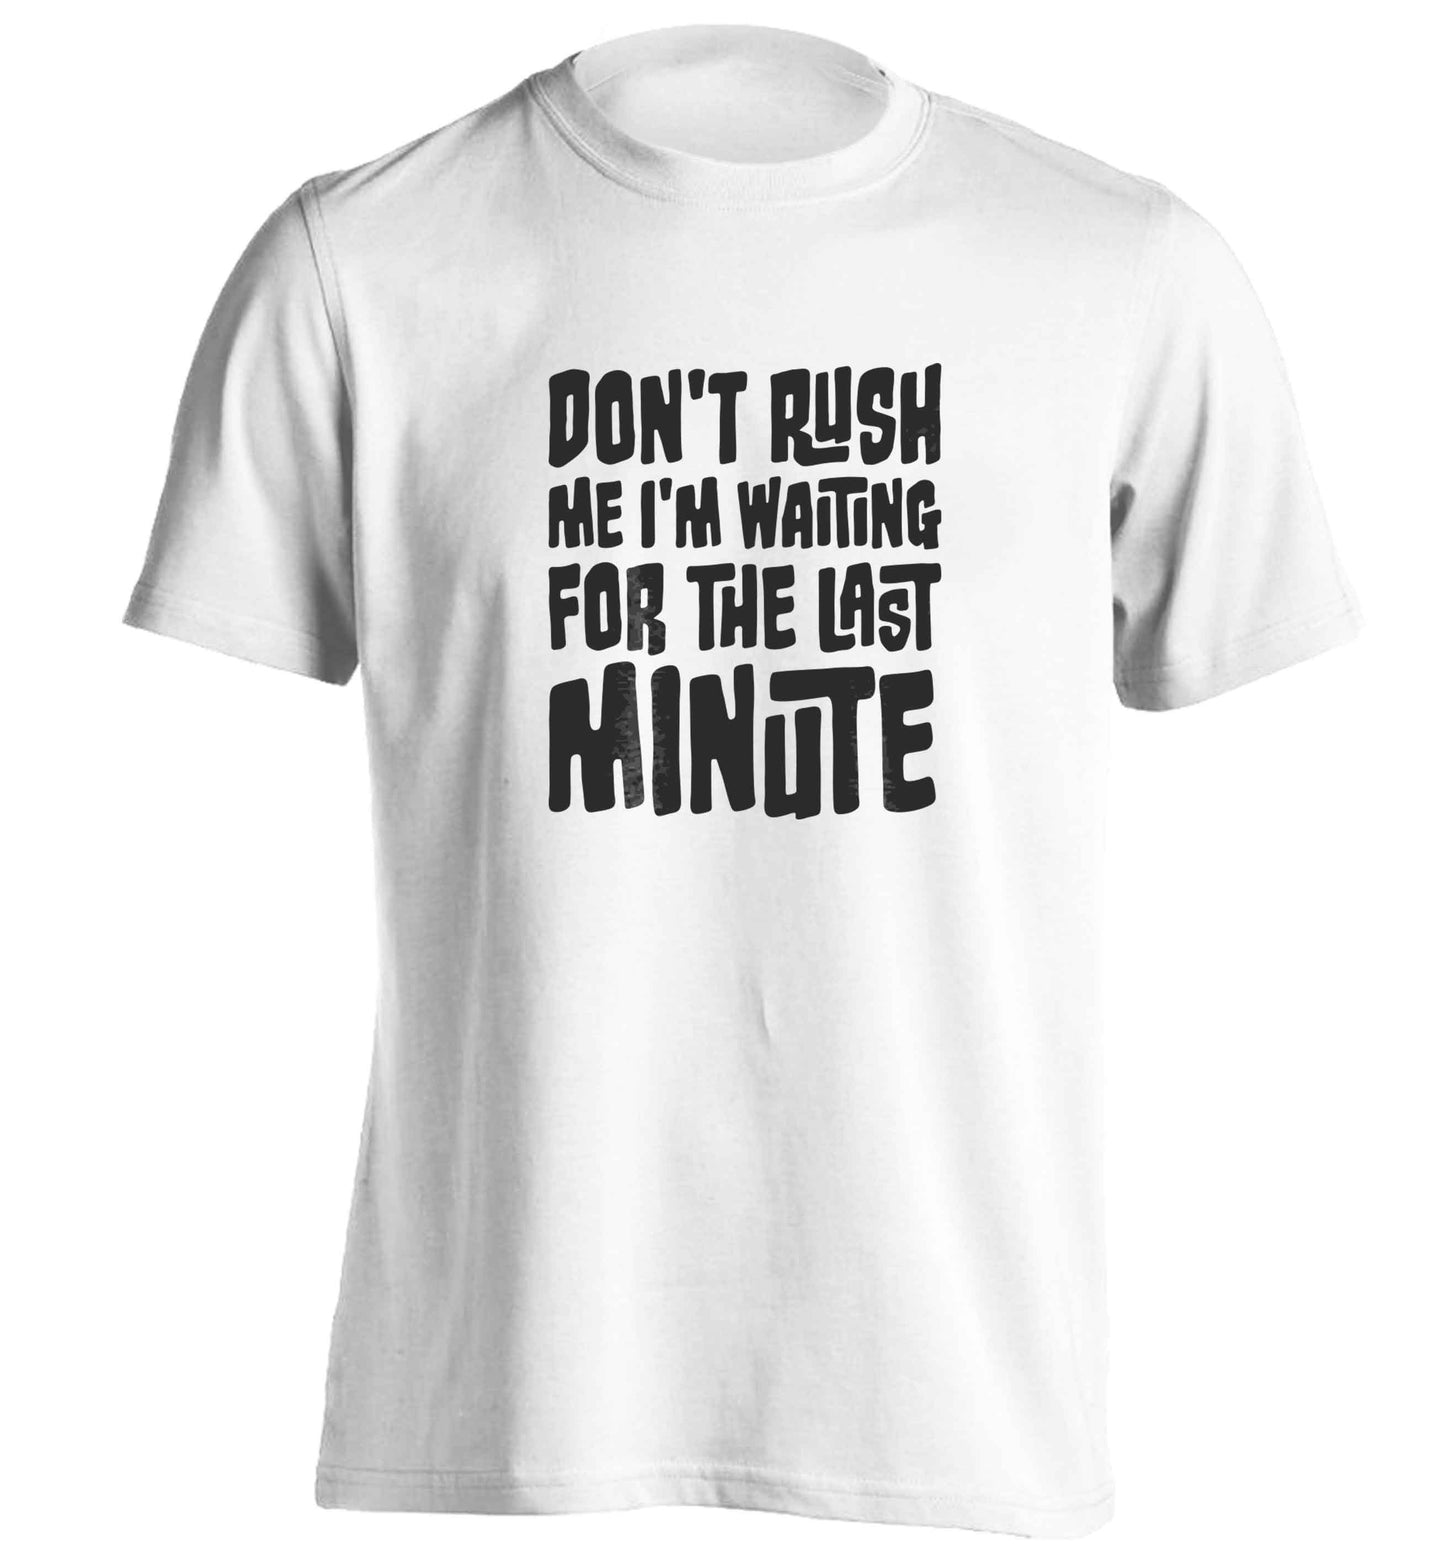 Don't rush me I'm waiting for the last minute adults unisex white Tshirt 2XL